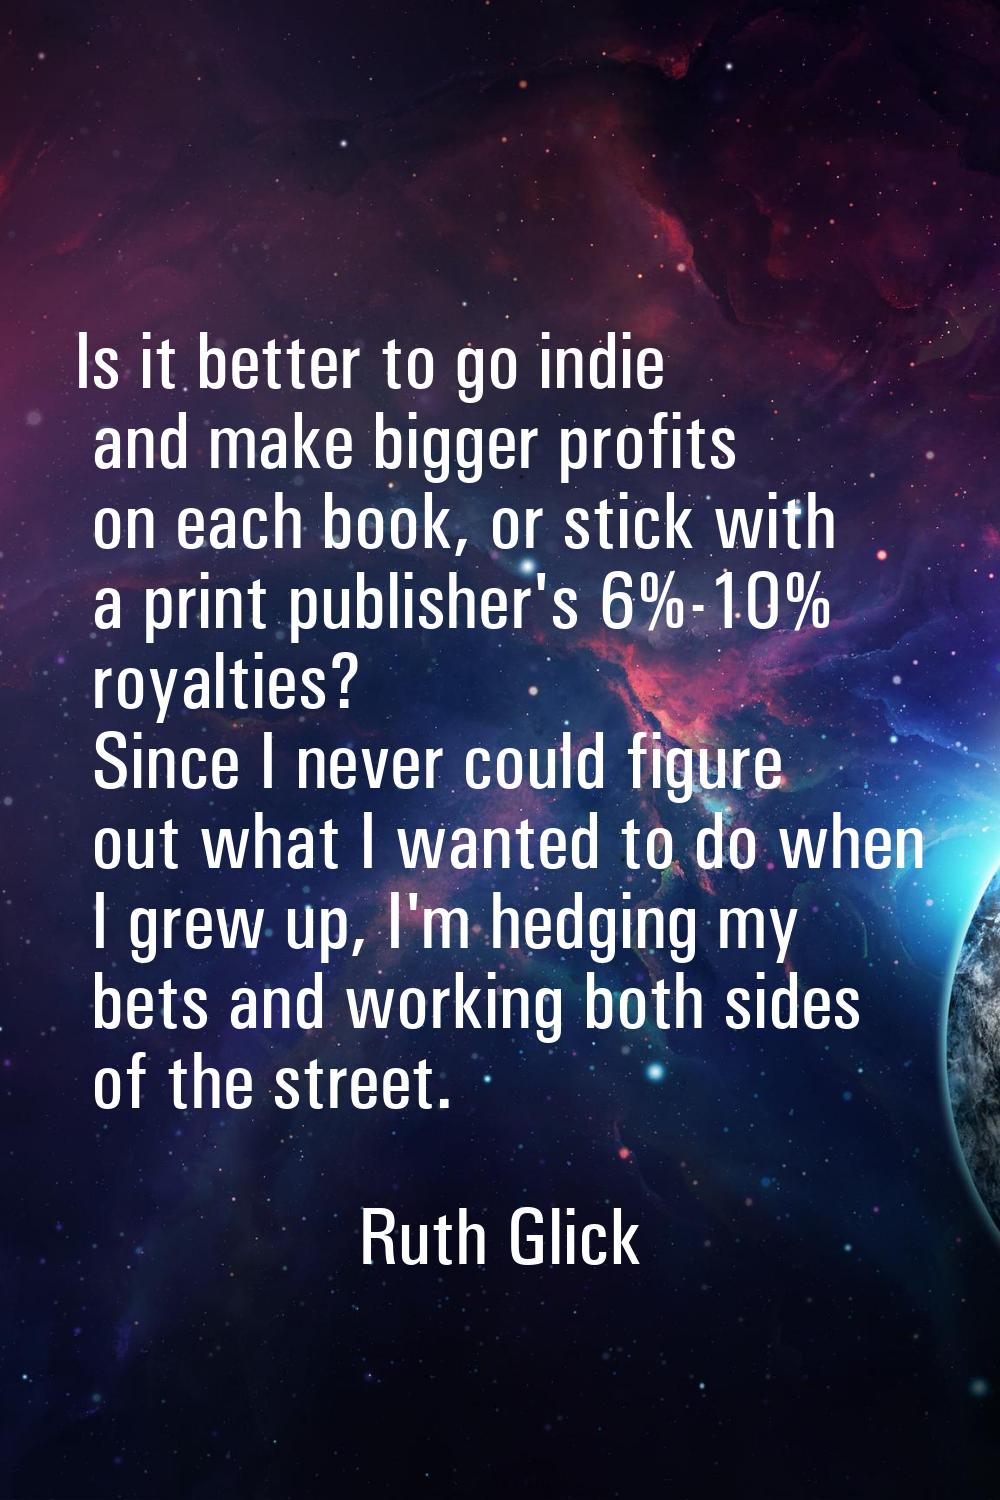 Is it better to go indie and make bigger profits on each book, or stick with a print publisher's 6%